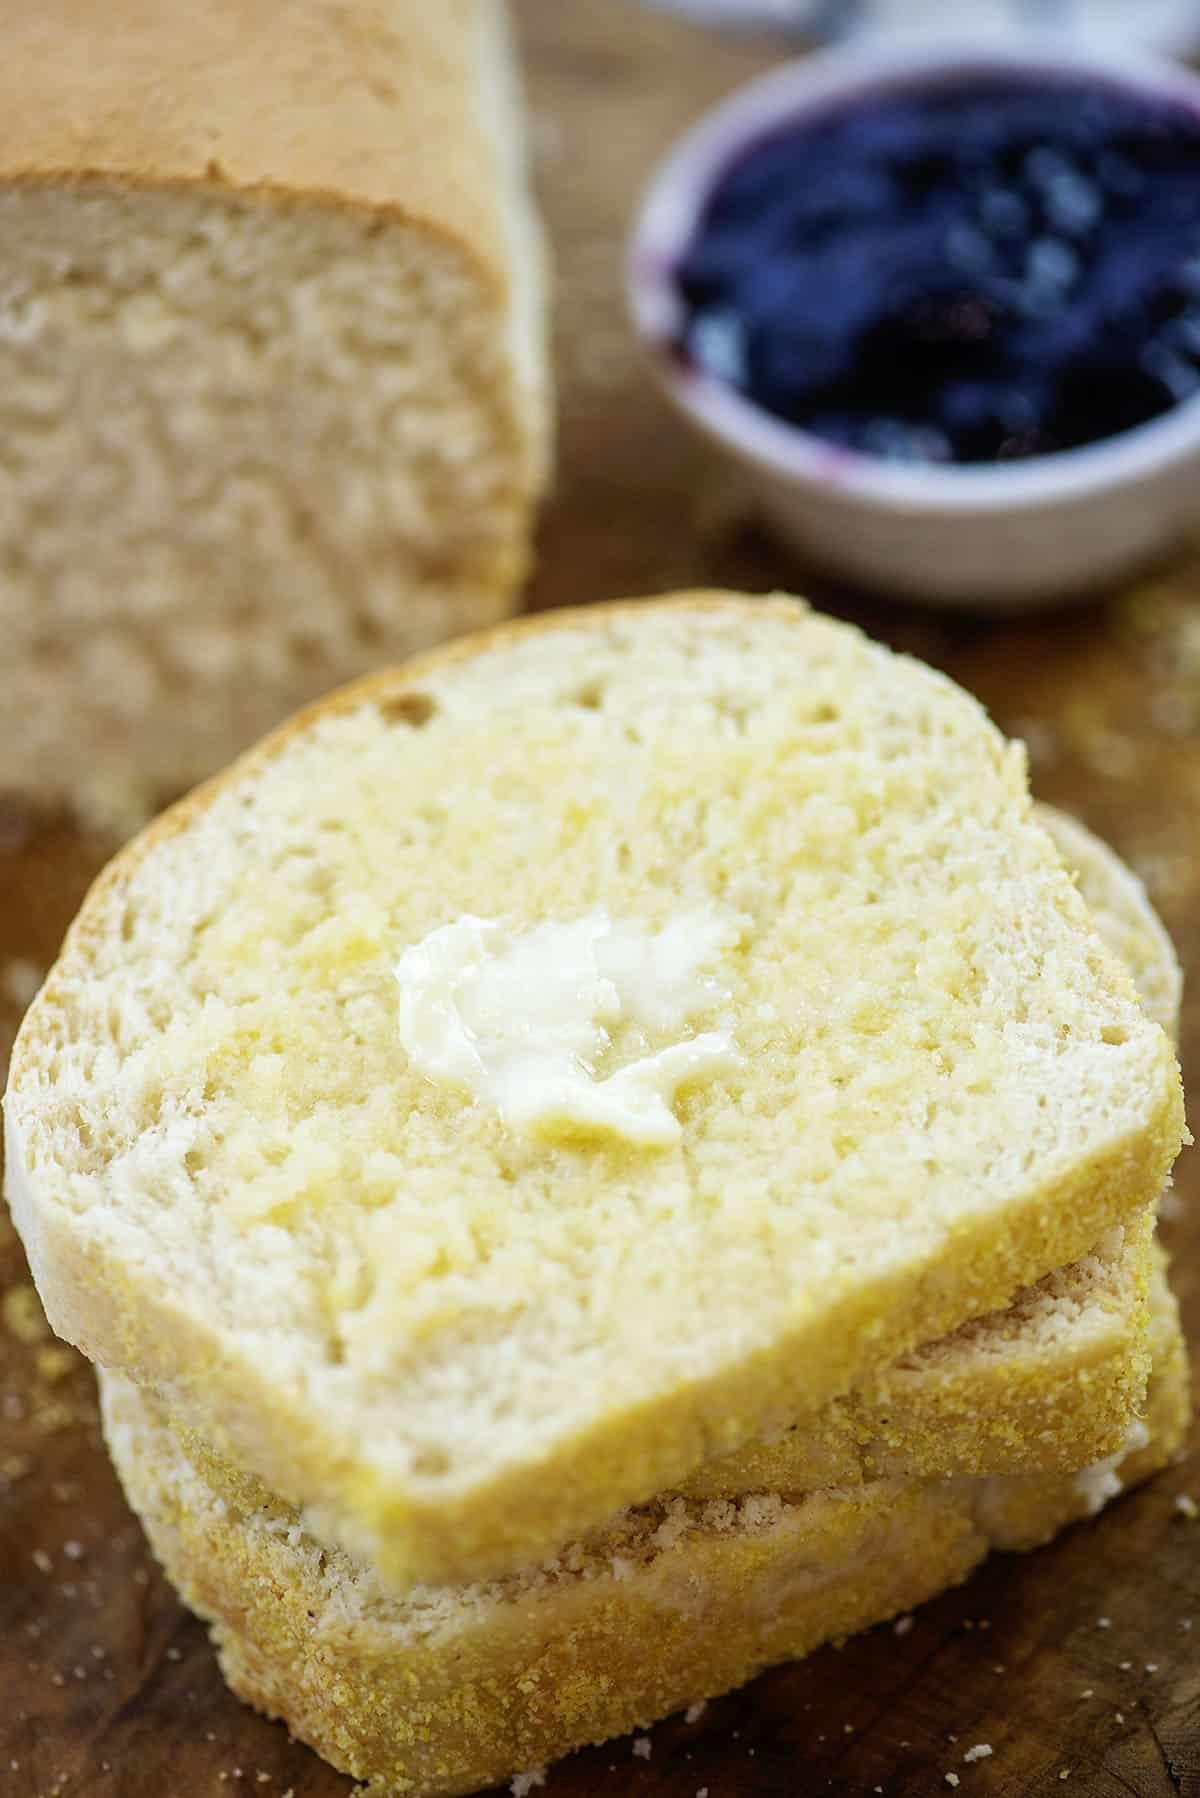 Sliced bread spread with butter.